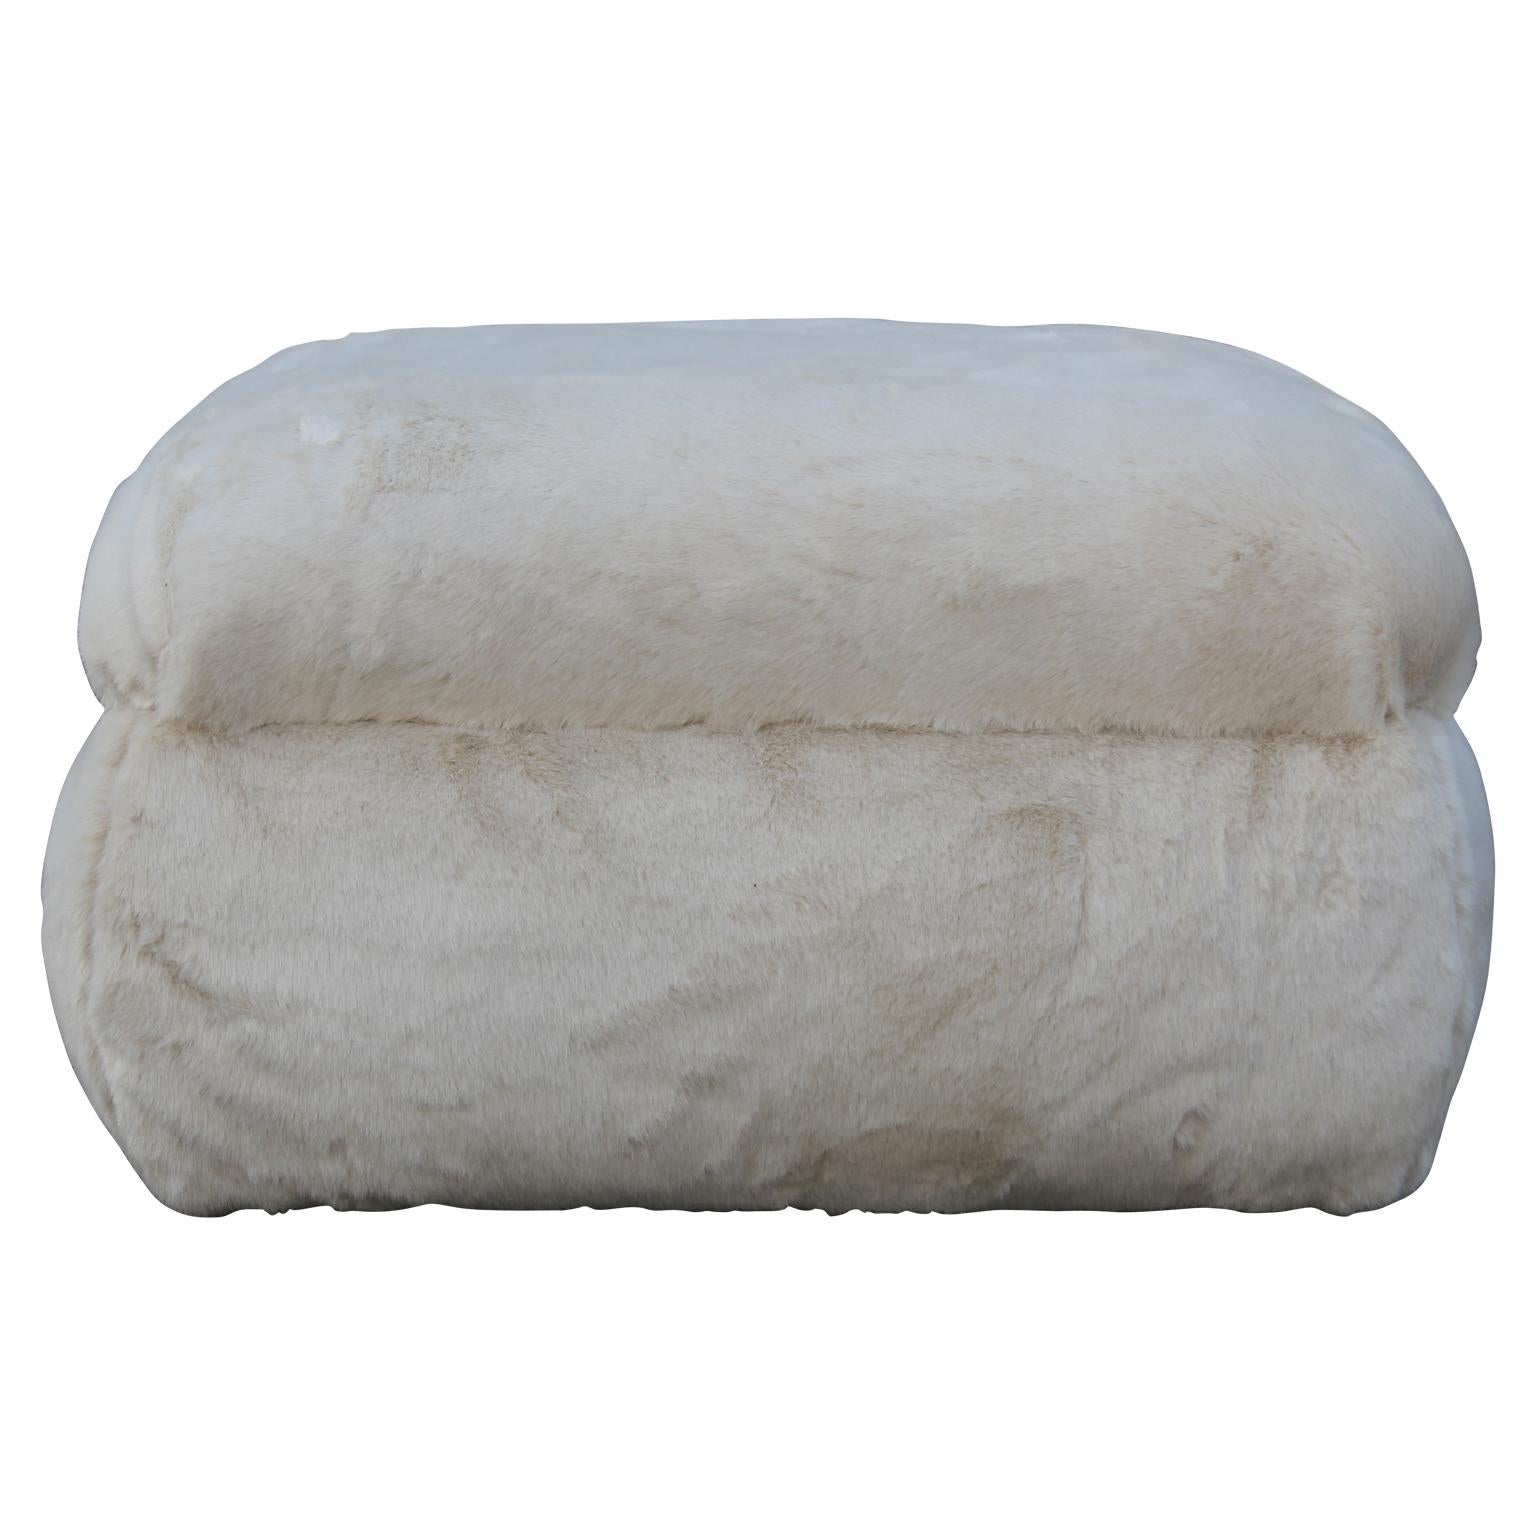 Gorgeous and lush ottoman or pouf freshly upholstered in a lush cream or neutral colored faux fur. Very soft to the touch.